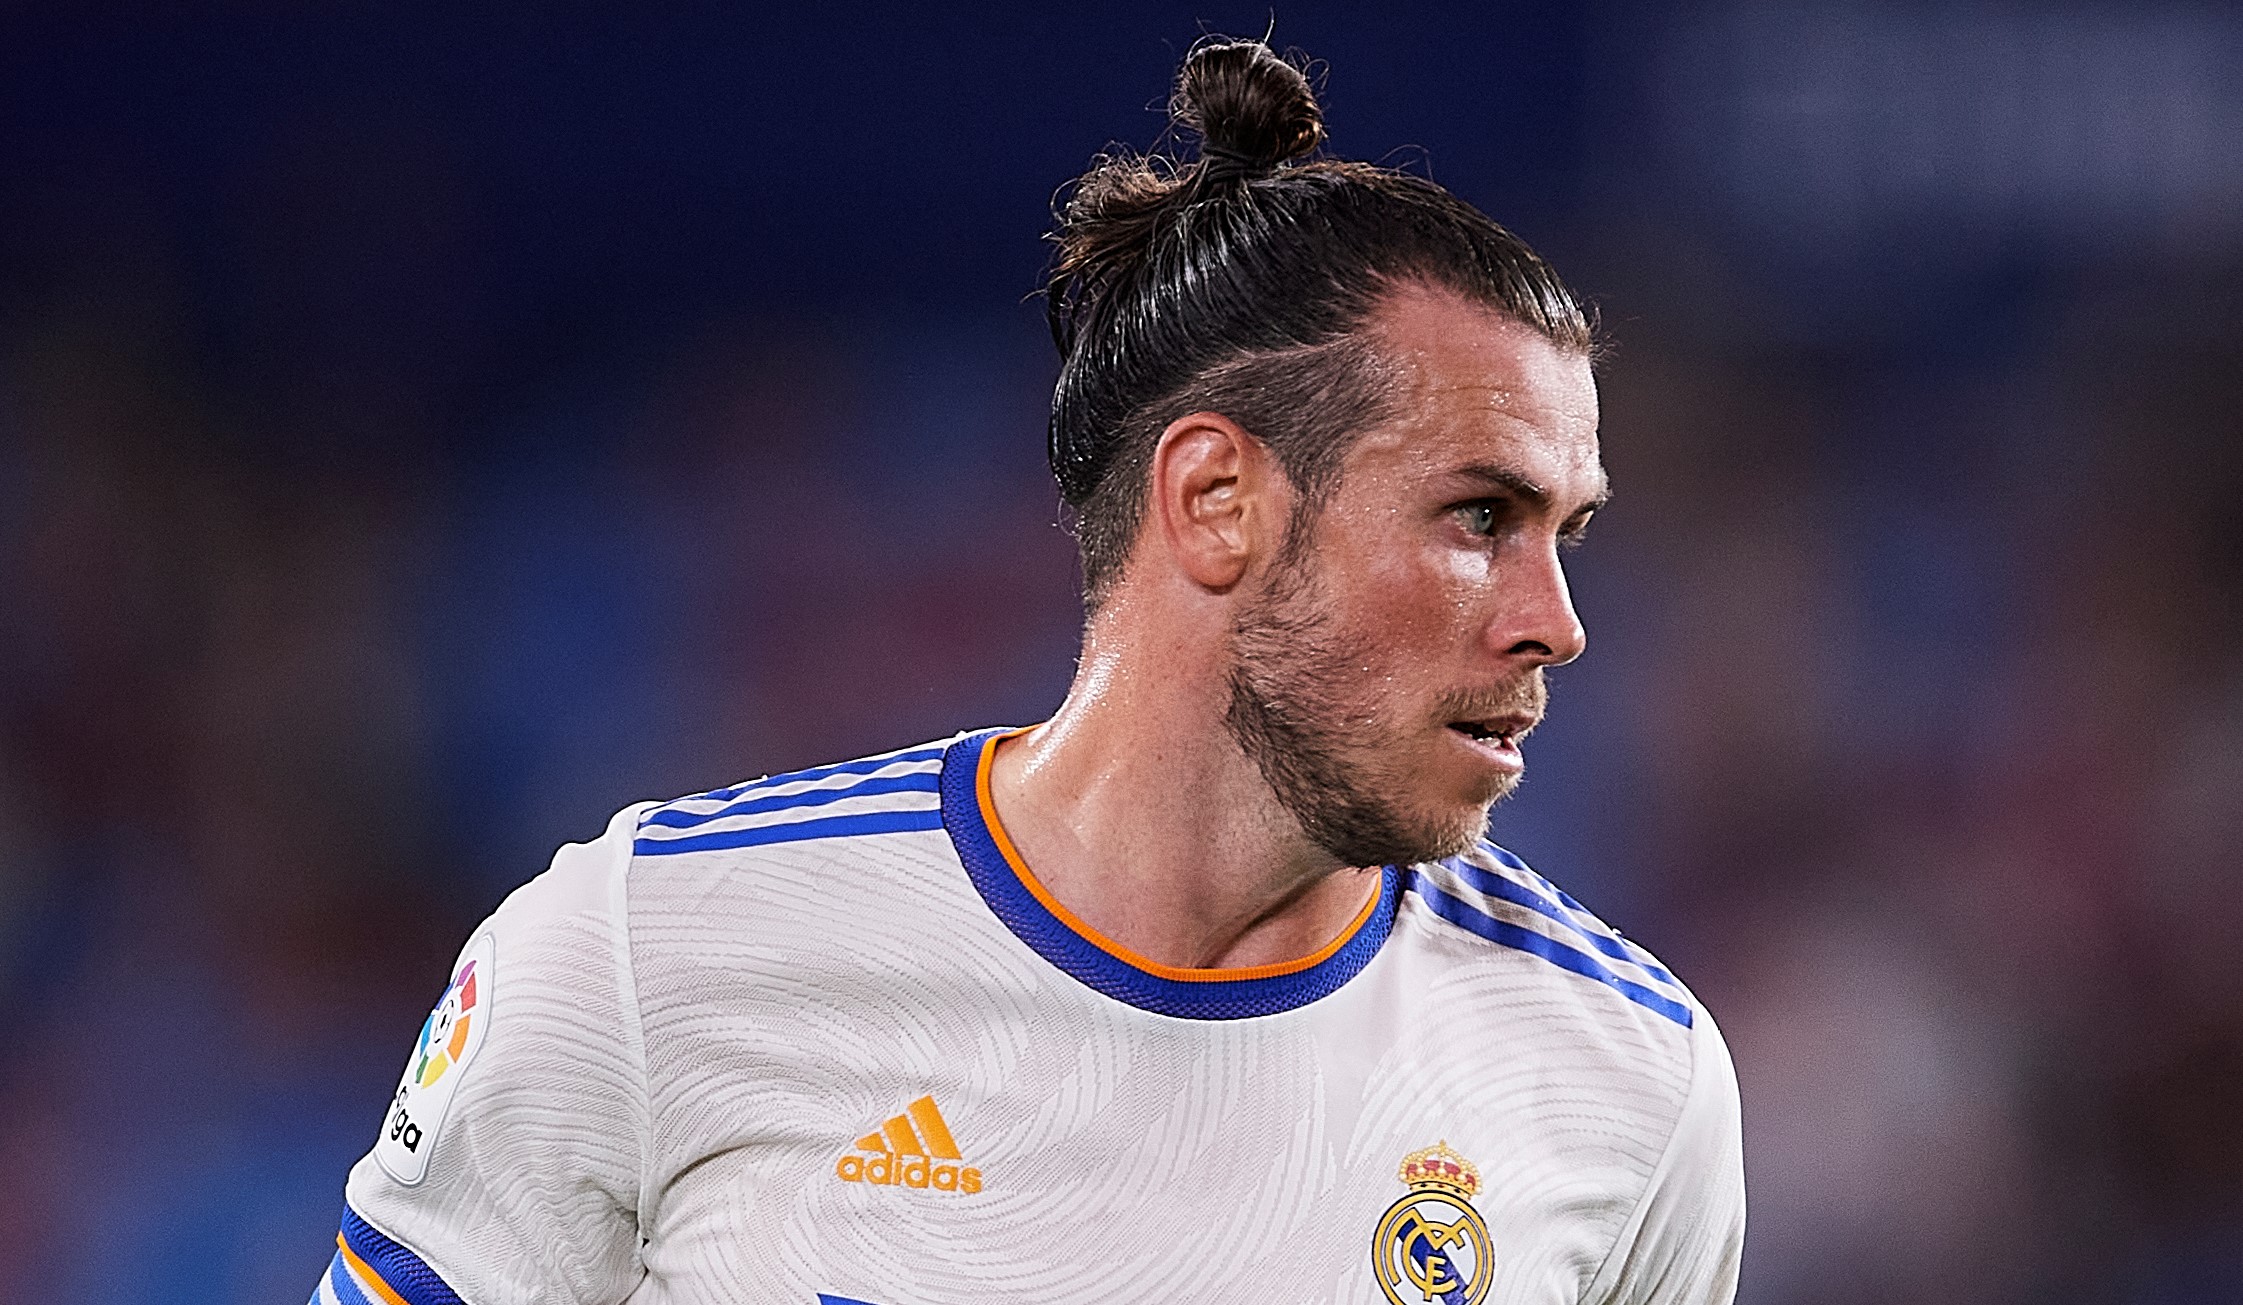 Bale to return to fitness ahead of Real Madrid vs Atletico Madrid